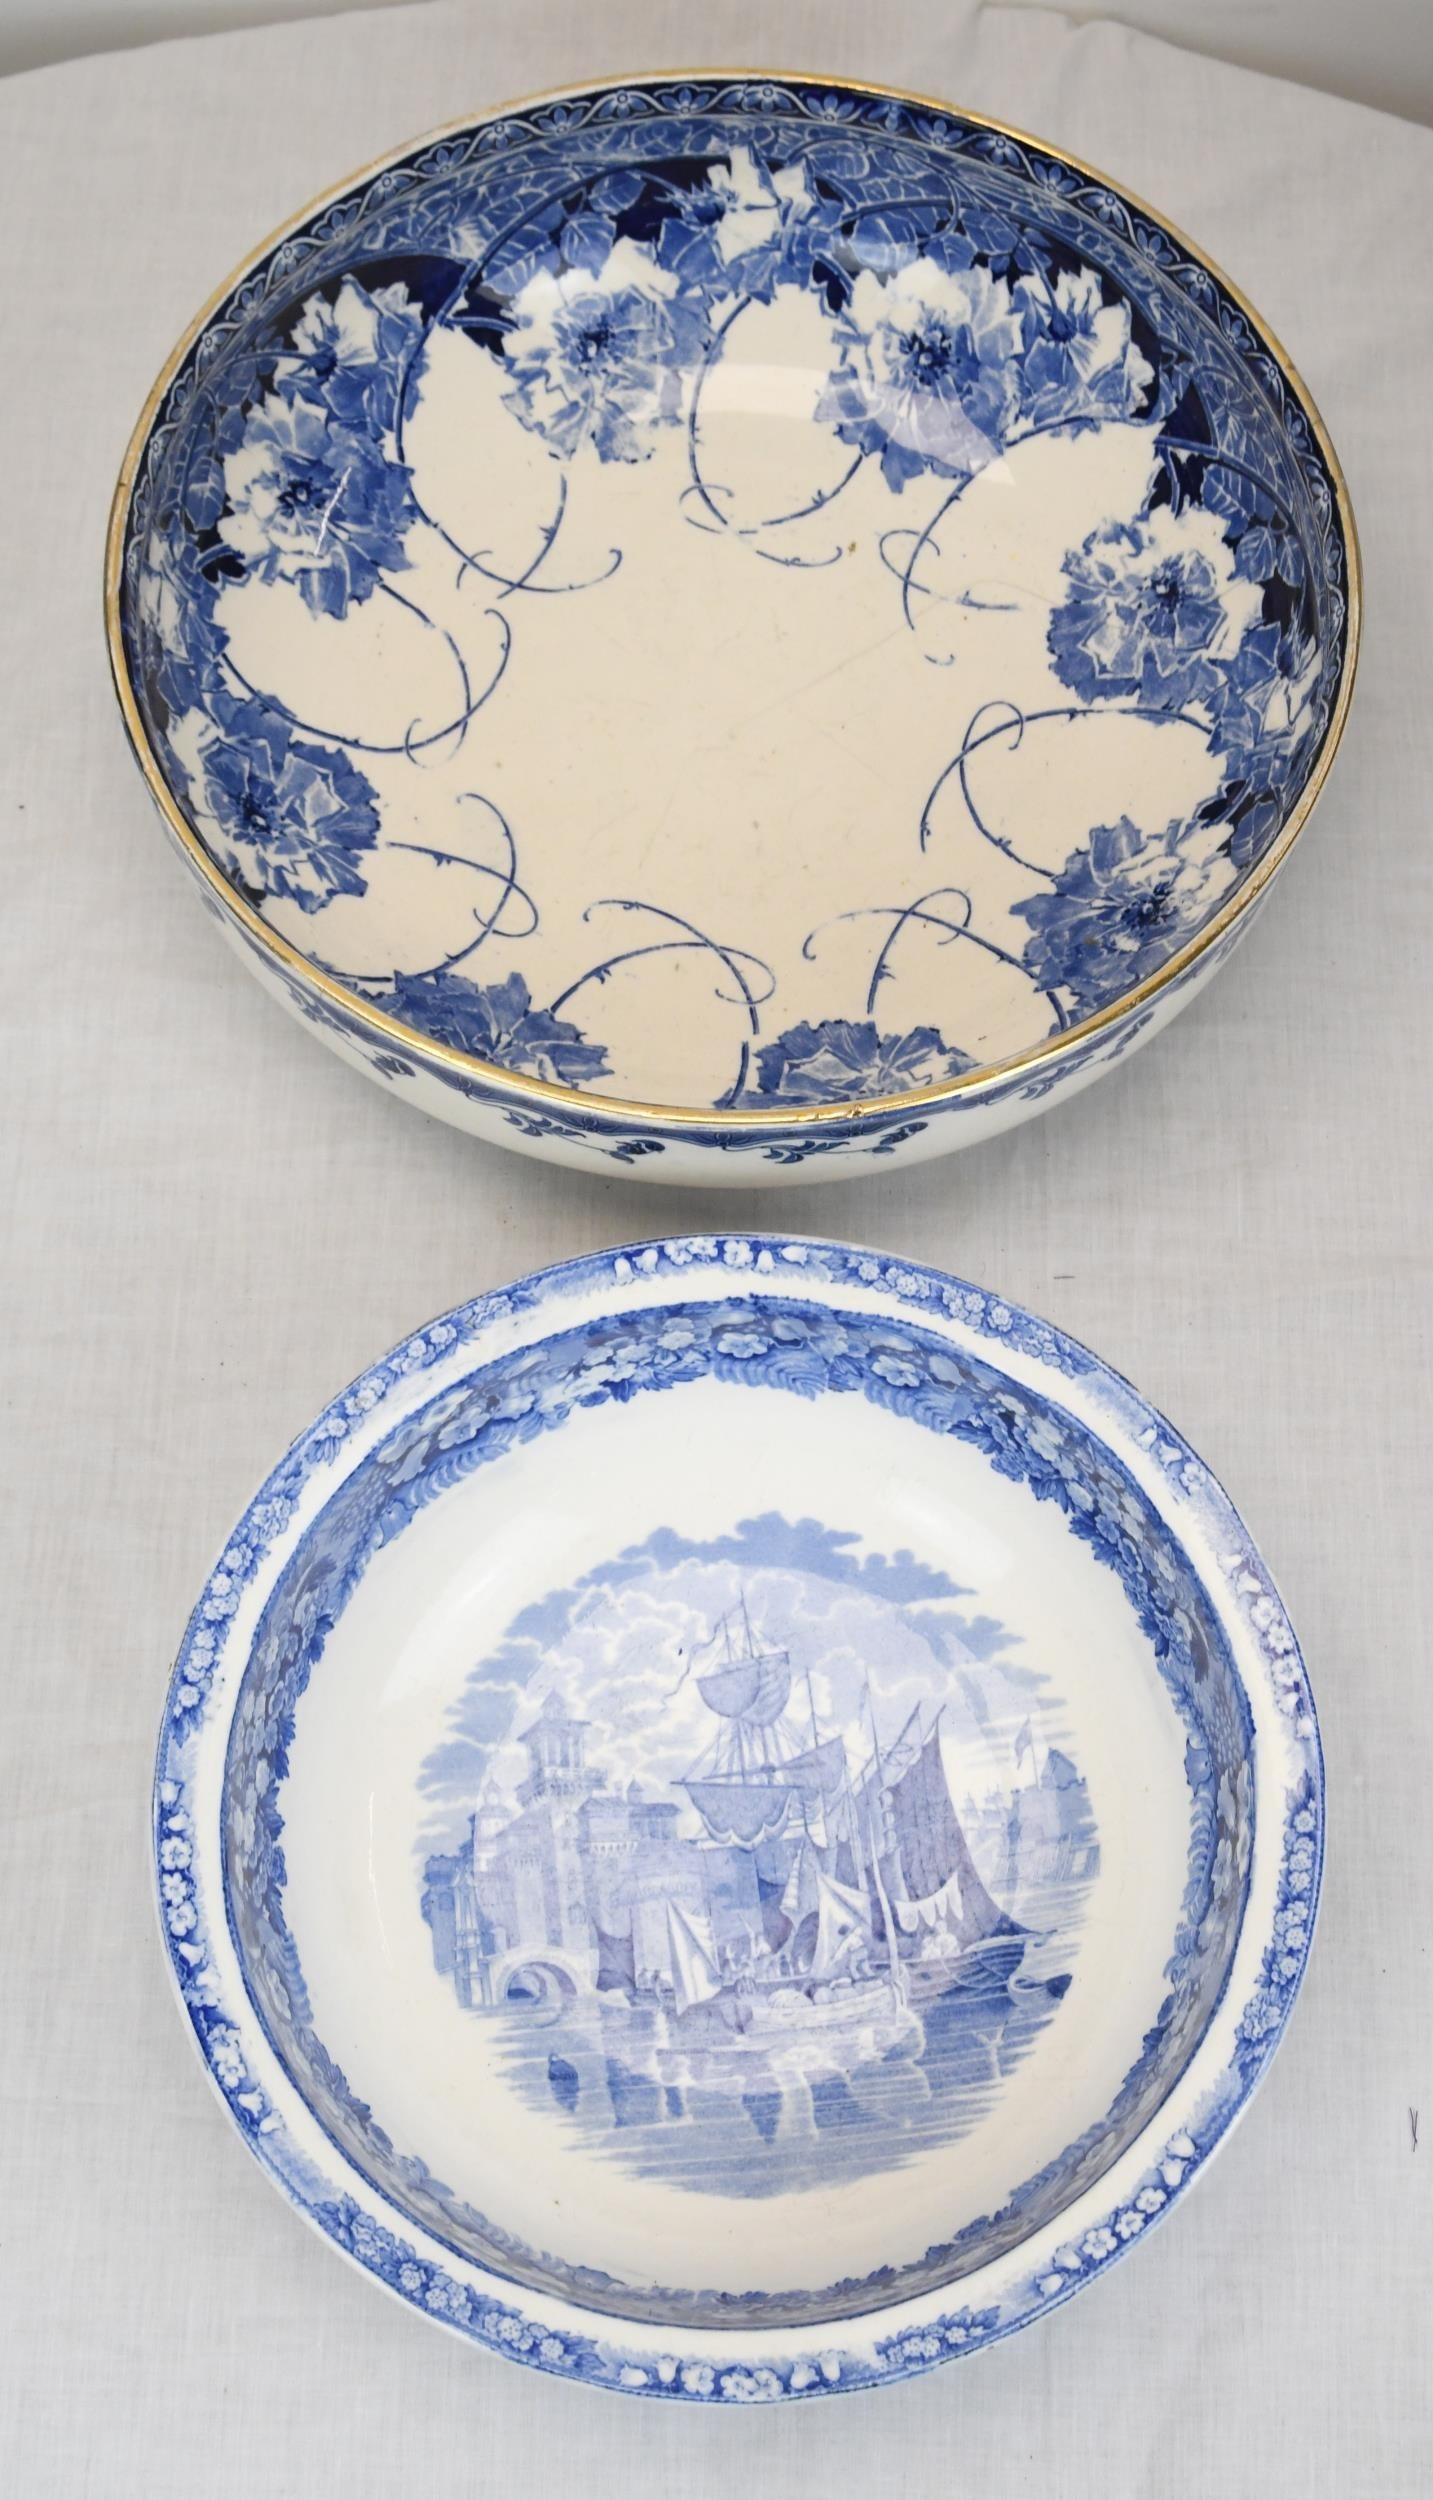 Two Royal Doulton hand painted blue and white early twentieth century ceramics. The largest has a